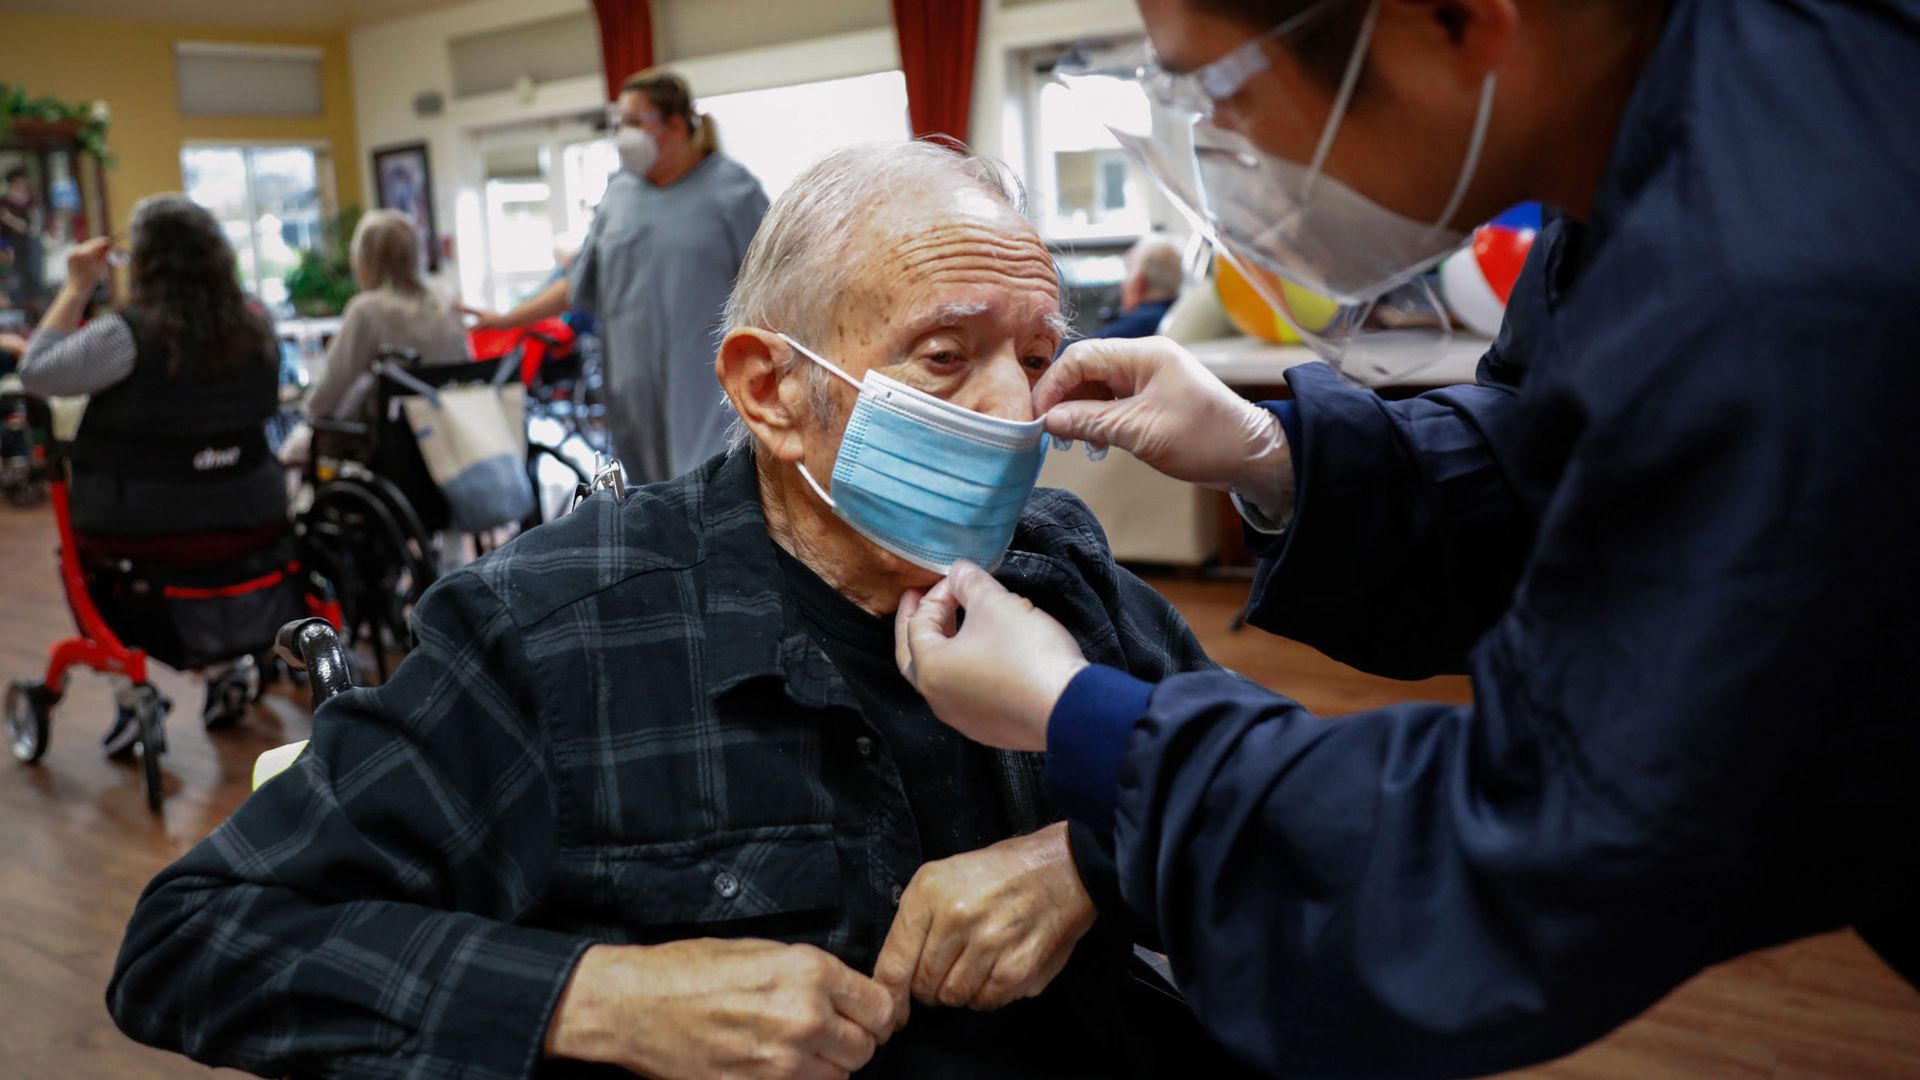 Image of a mask being put on an elderly man in a nursing home.